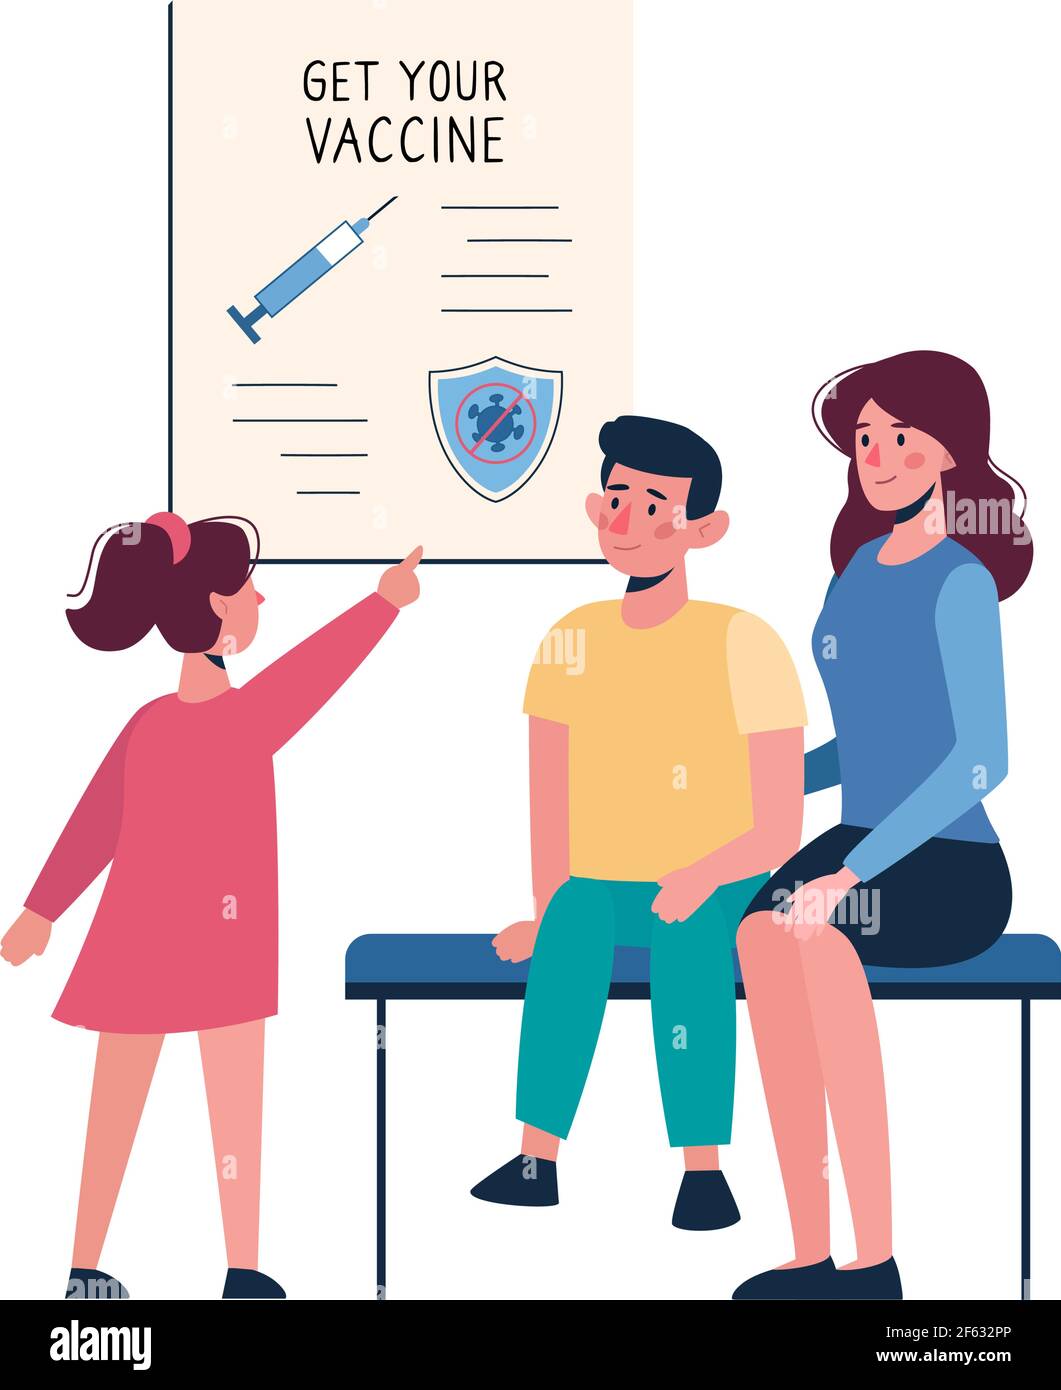 Medical poster on vaccination of people against coronavirus COVID-19. The  woman brought the children to the hospital for vaccination. Vector people,  a vaccine, a shield, a syringe. Cartoon style Stock Vector Image